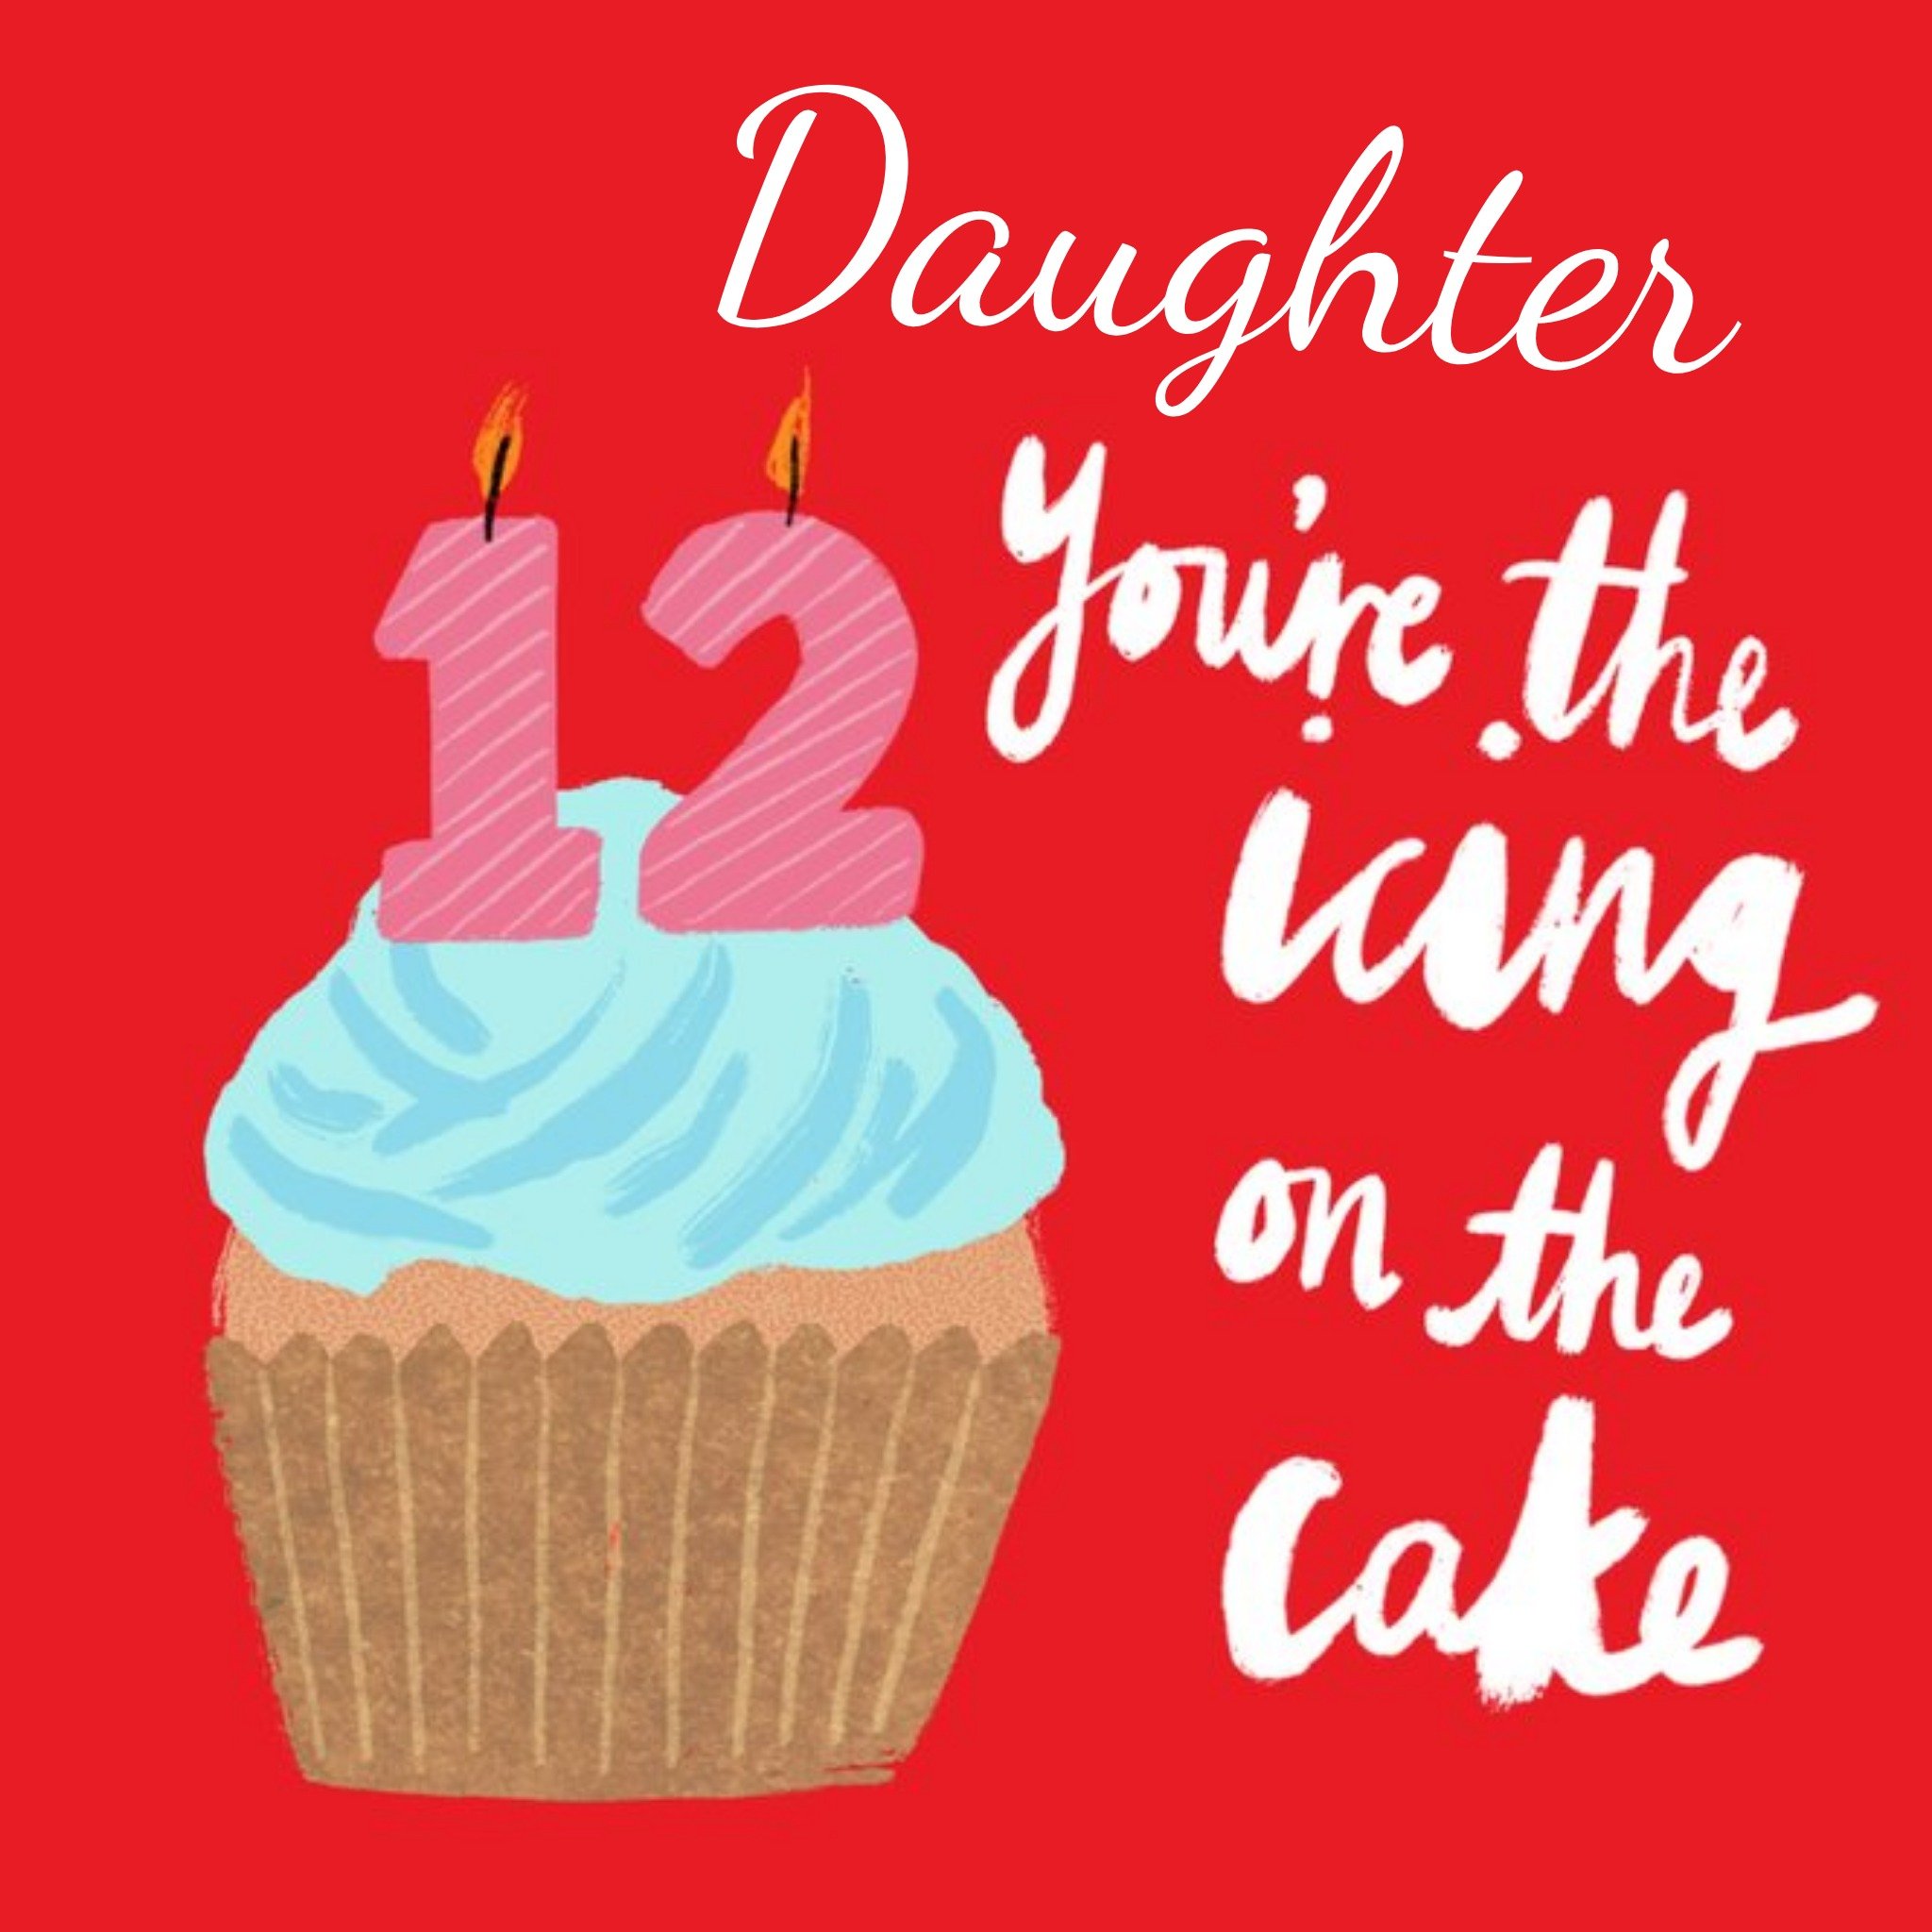 Moonpig Typographic 12 Your The Icing On The Cake Birthday Card, Large